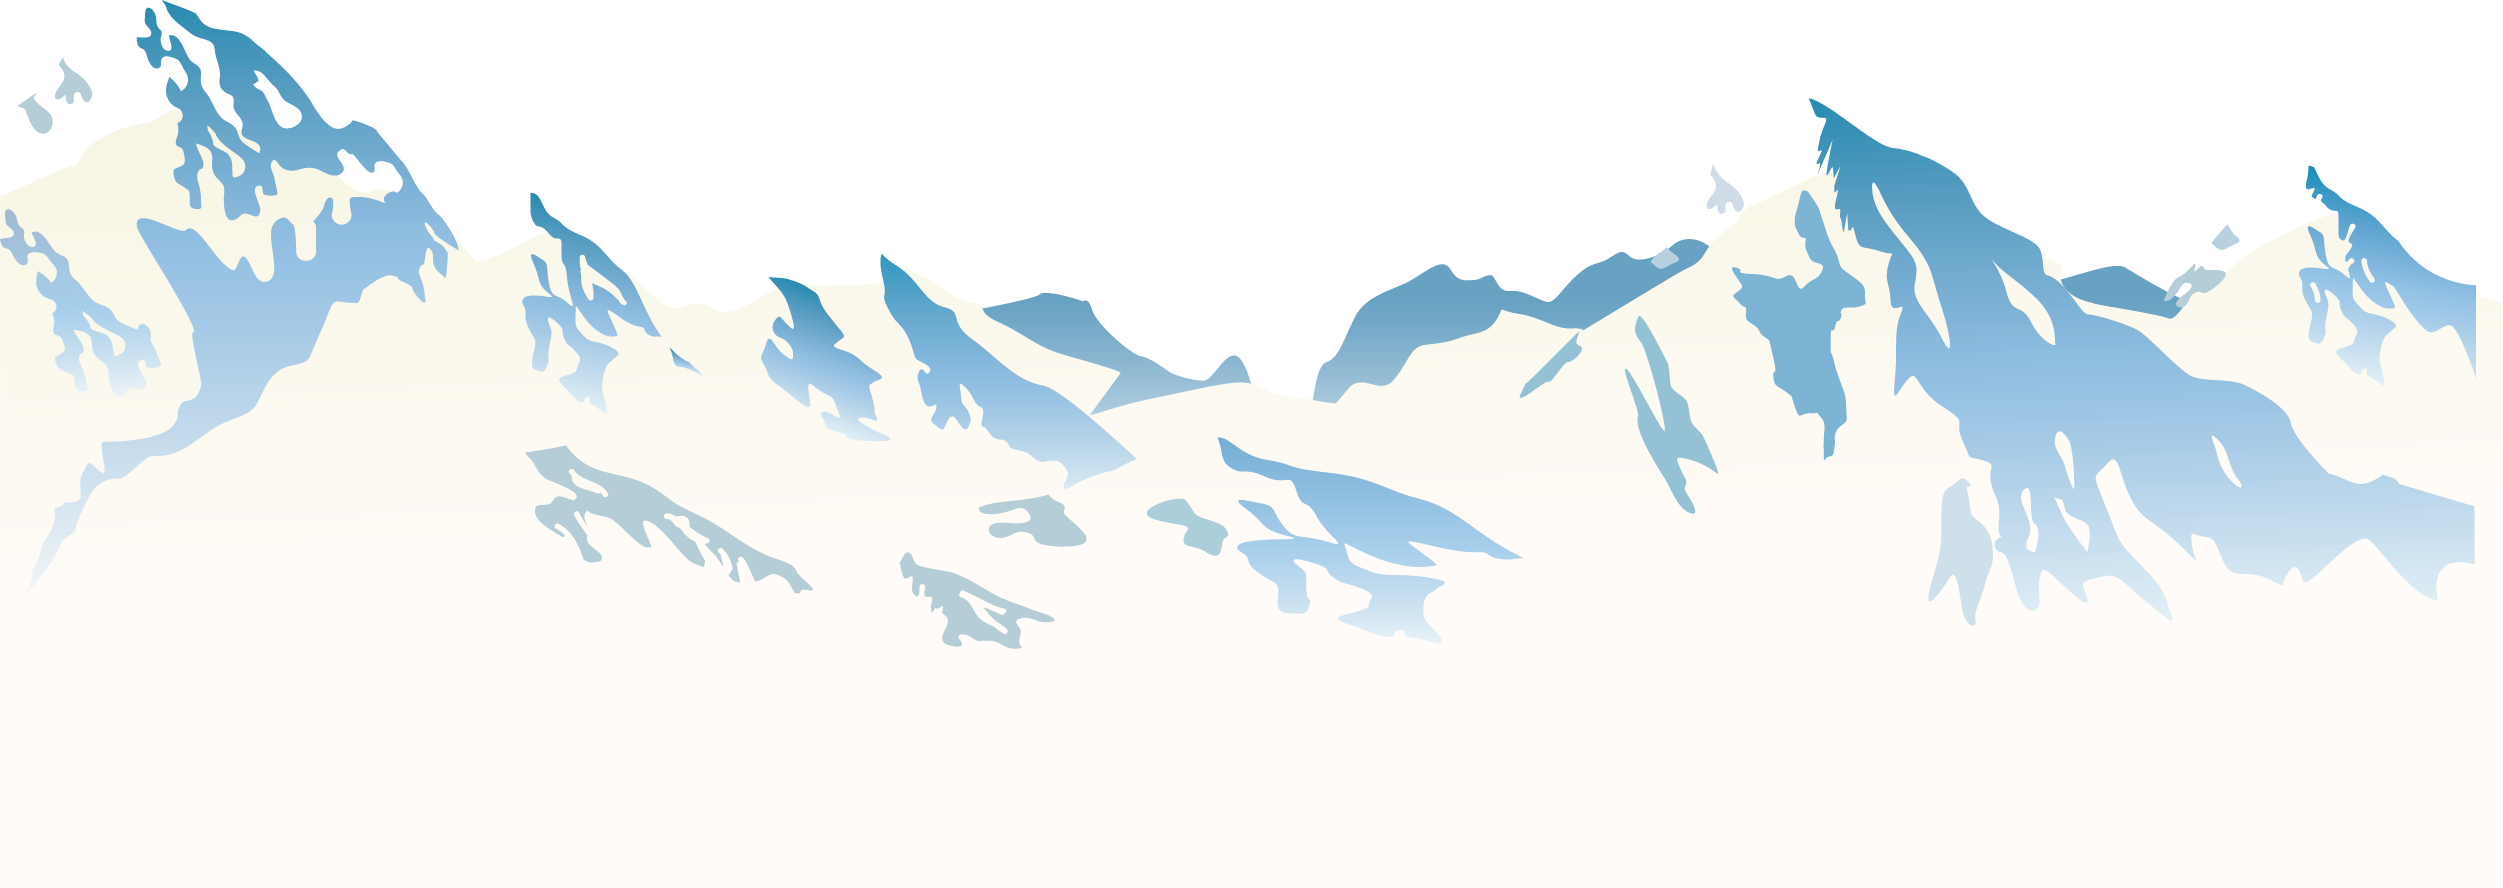 everest, banner, painting Png images with transparent background